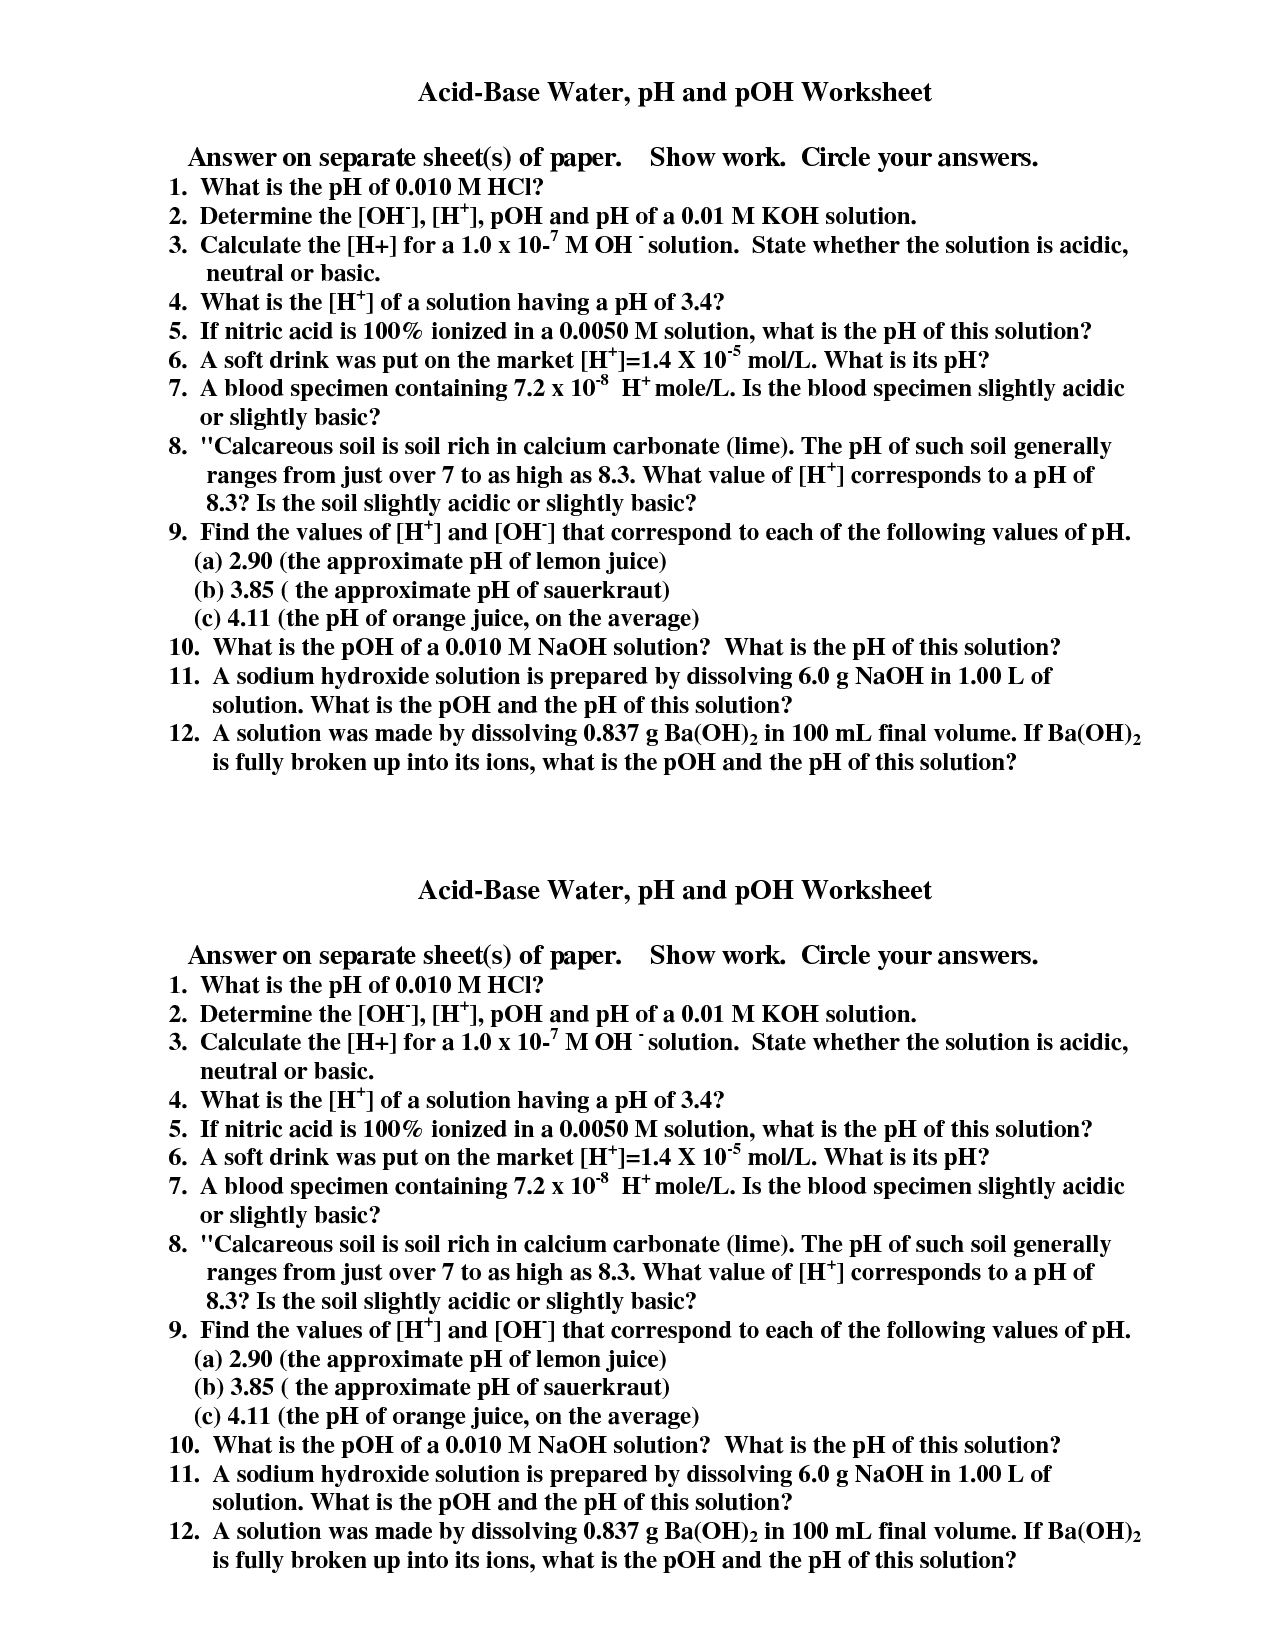 pH and Poh Calculations Worksheet Image